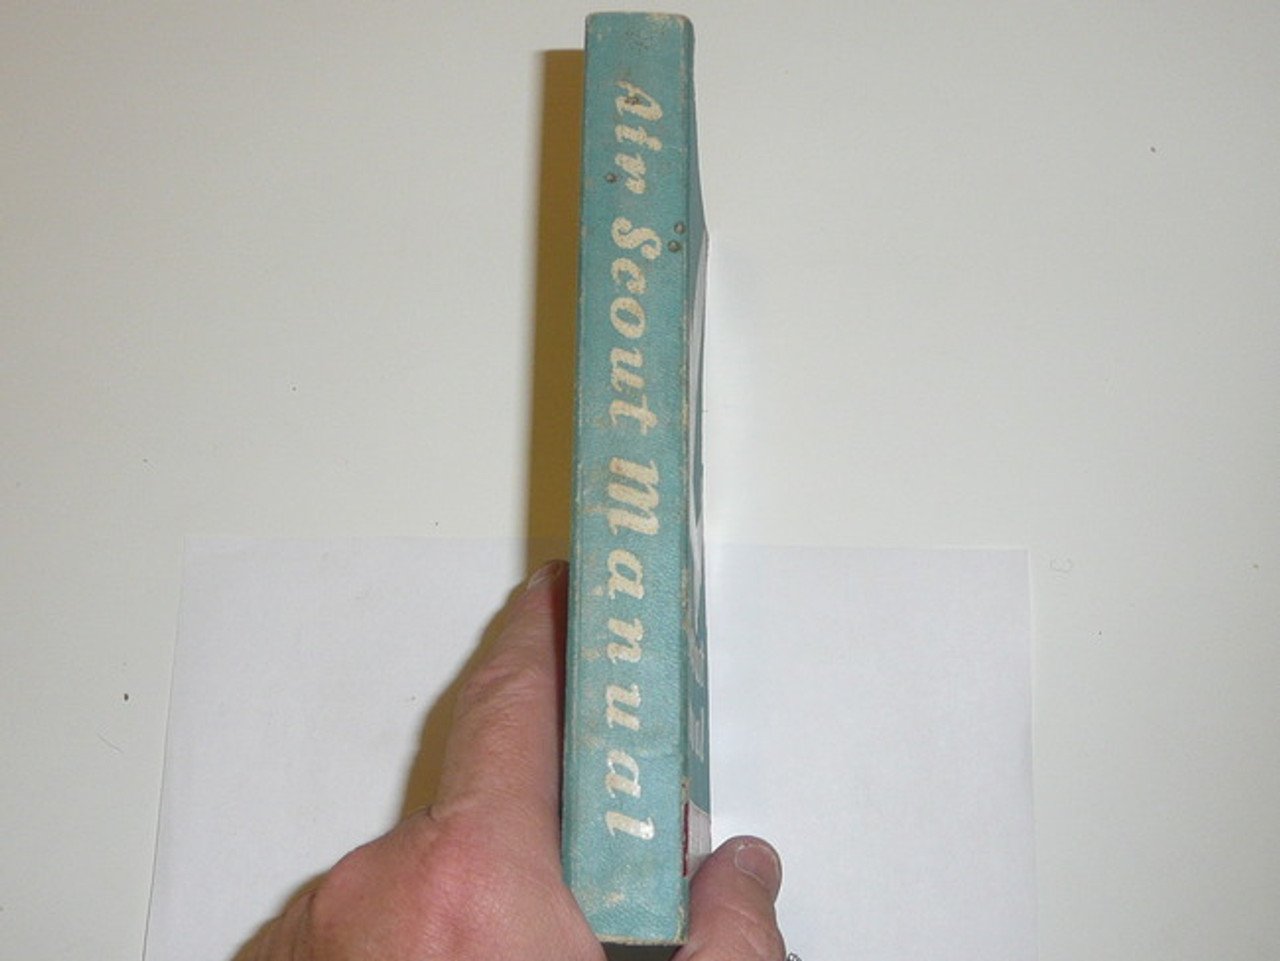 1942 Air Scout Manual, Proof Edition, 11-42 Printing